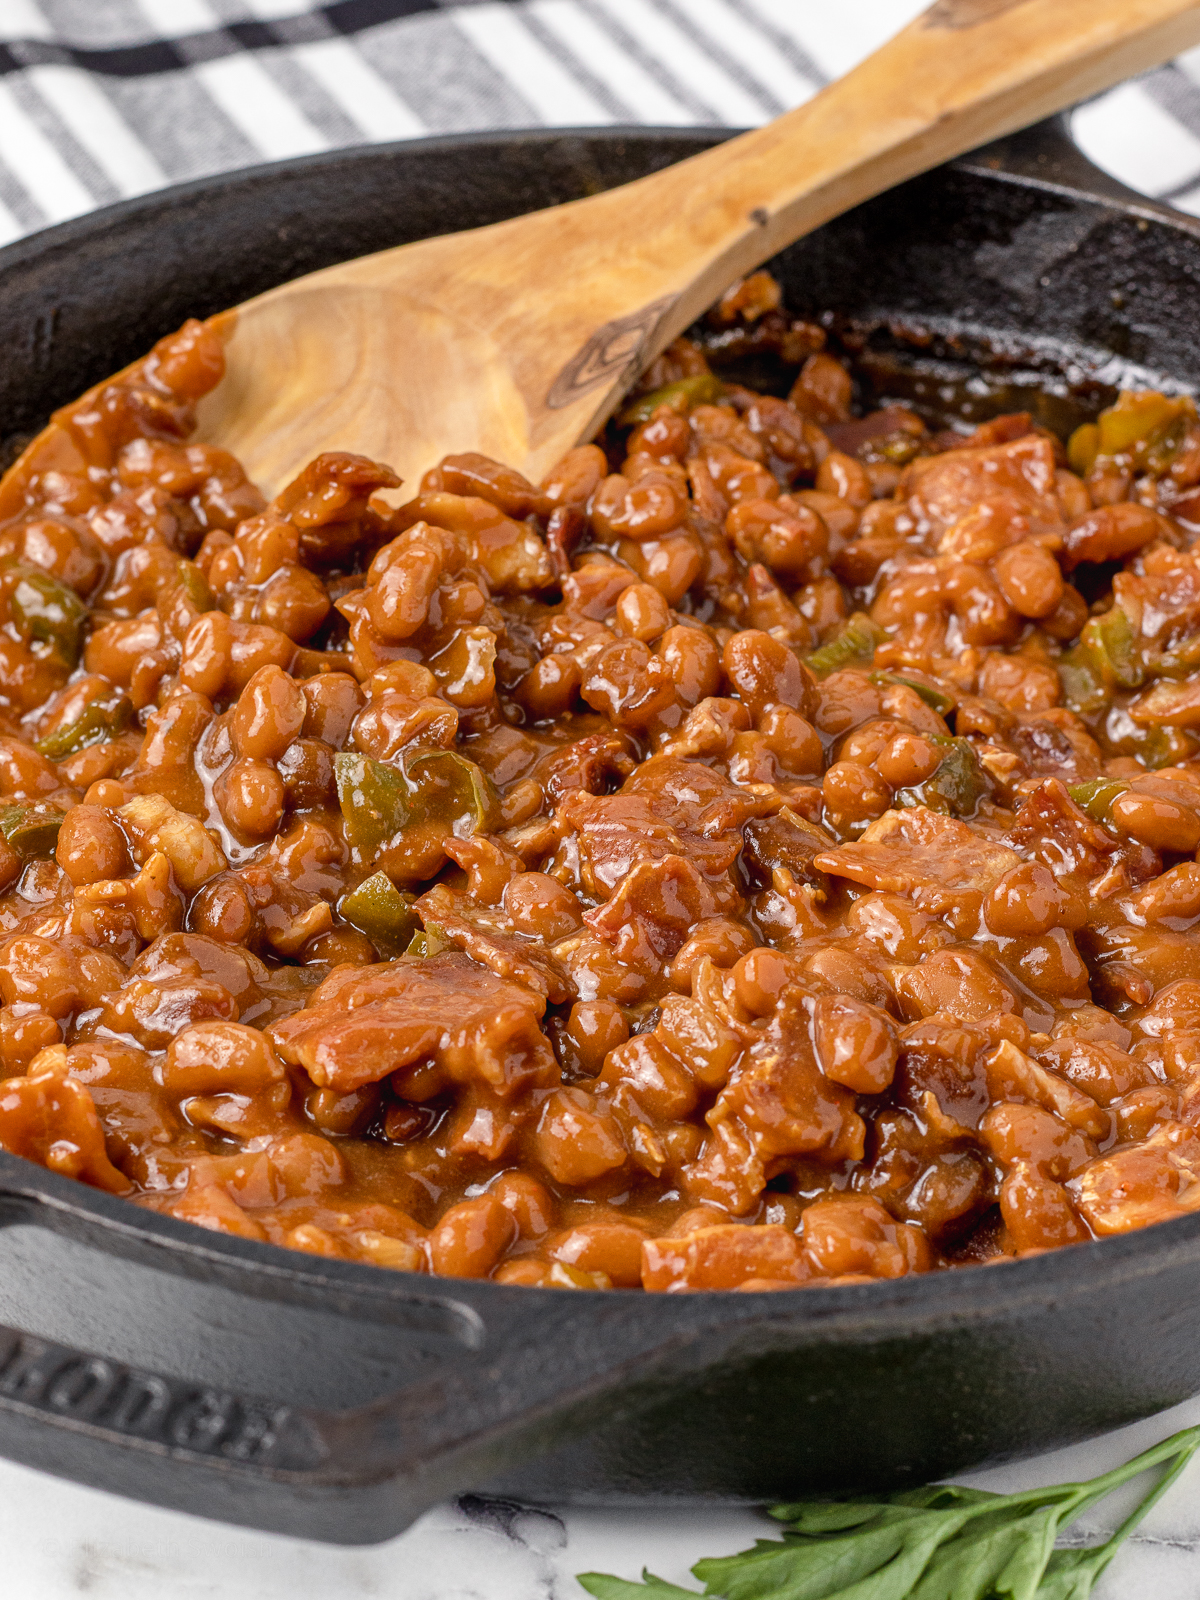 Smoked Baked Beans with a large spoon ready to serve.